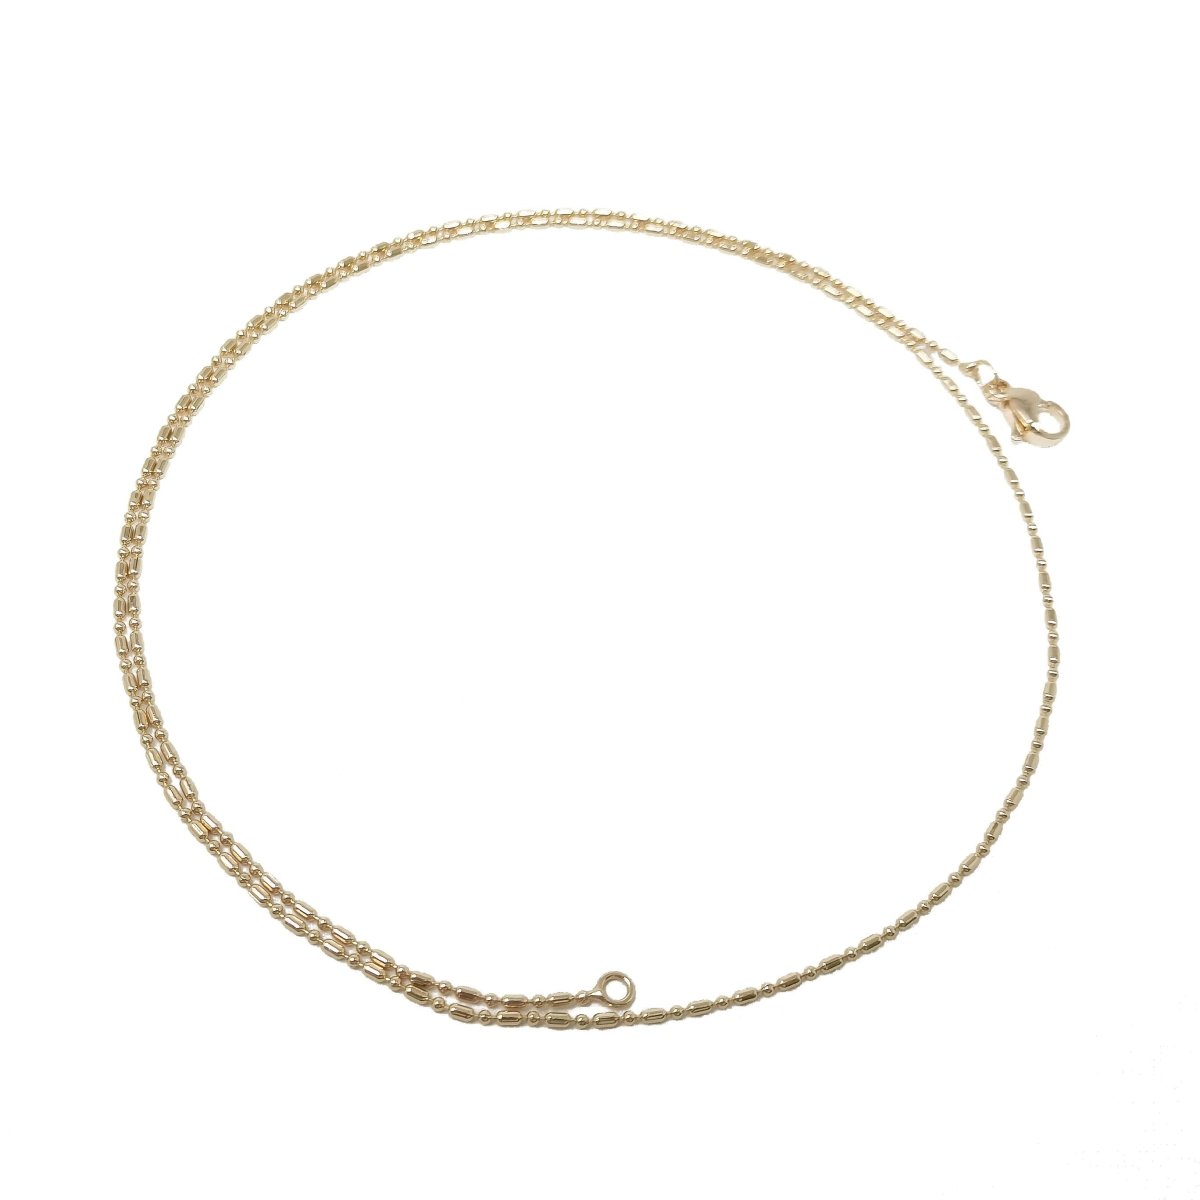 16, 17.8, 19.8 Inches Gold Filled Bead Necklace - 1.2mm, 14K Gold Filled Bead Necklace w/Lobster Clasps | CN-903, CN-904, CN-905 Clearance Pricing - DLUXCA